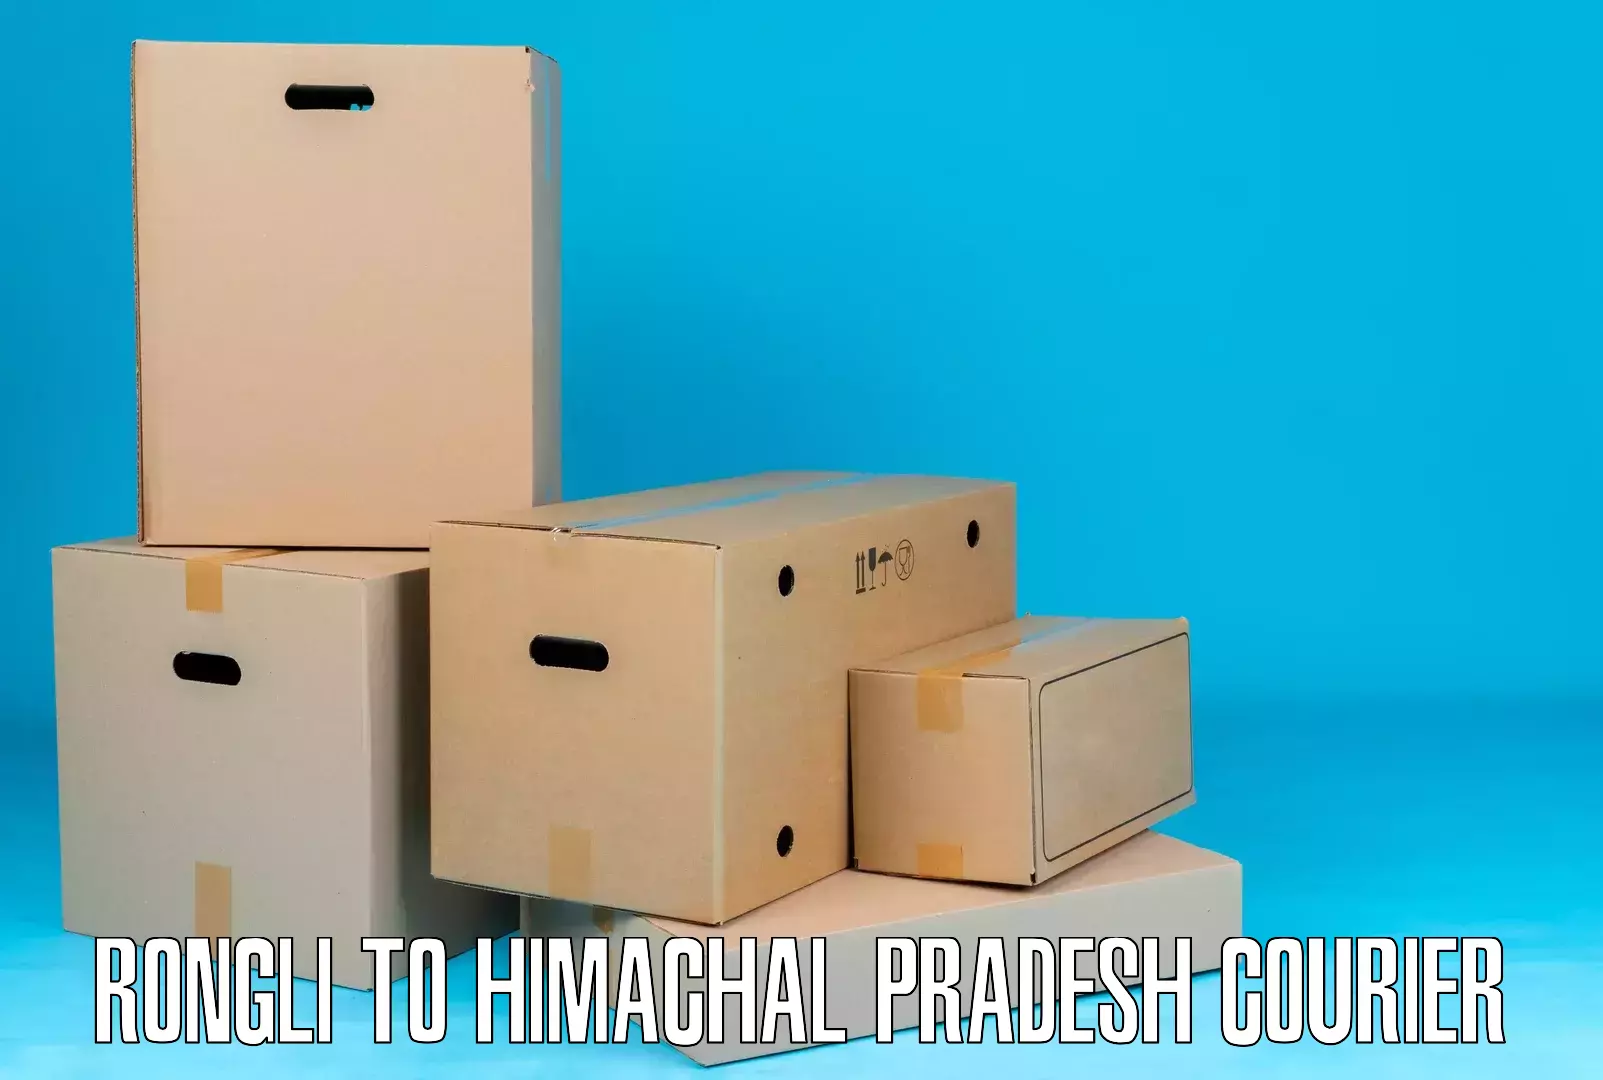 Professional courier services in Rongli to Dalhousie